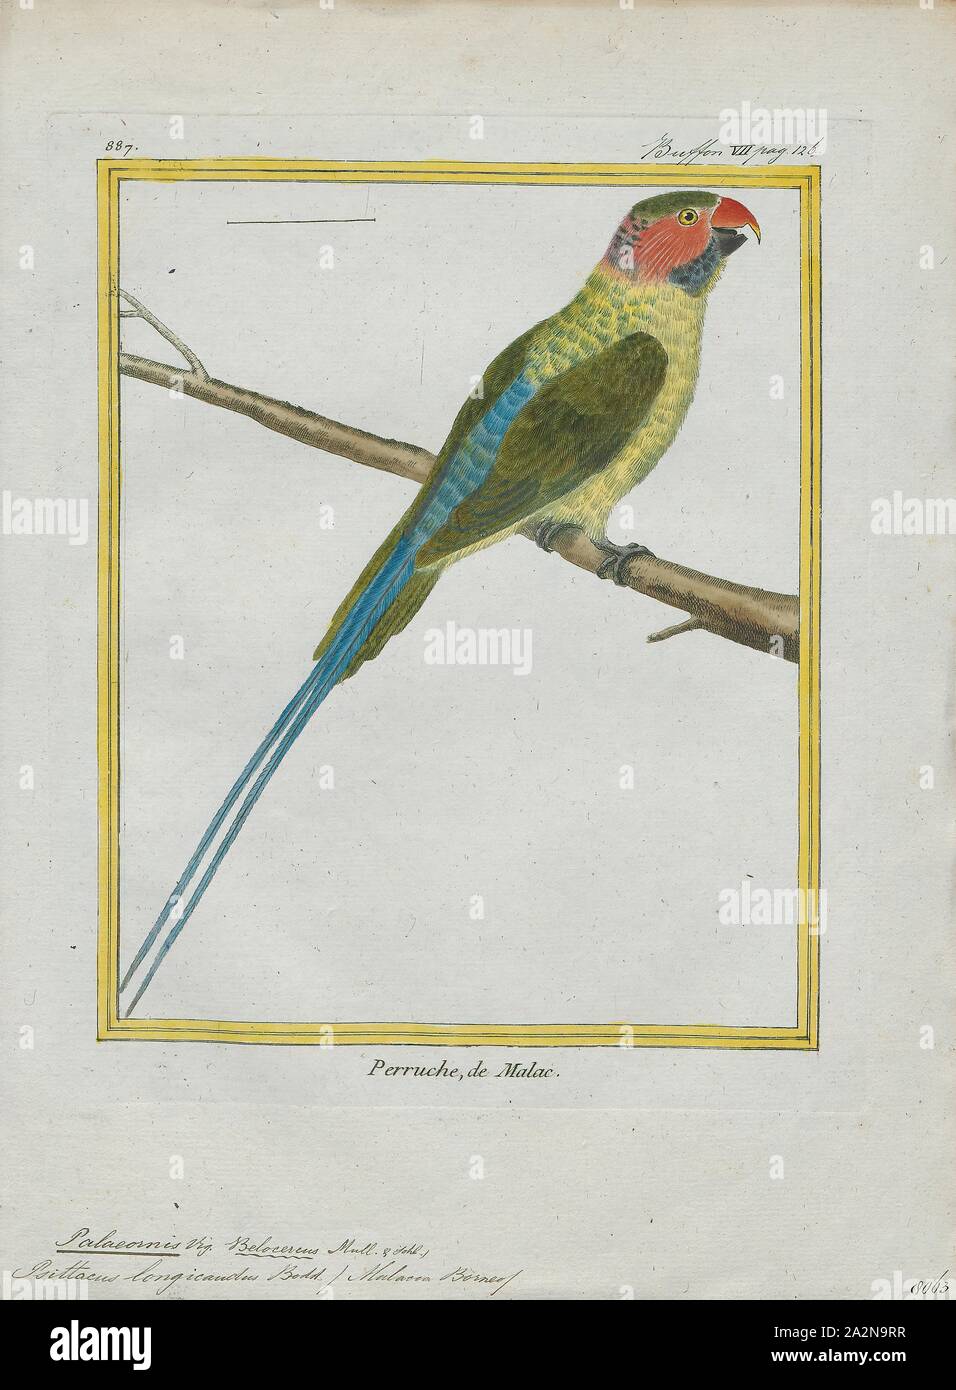 Palaeornis longicaudus, Print, Psittacula, Members of the parrot genus Psittacula or Afro-Asian ring-necked parakeets as they are commonly known in aviculture originates found from Africa to South-East Asia. It is a widespread group, with a clear concentration of species in south Asia, but also with representatives in Africa and the islands of the Indian Ocean. This is the only genus of Parrot which has the majority of its species in continental Asia. Of all the extant species only Psittacula calthropae, Psittacula caniceps and Psittacula echo do not have a representative subspecies in any Stock Photo